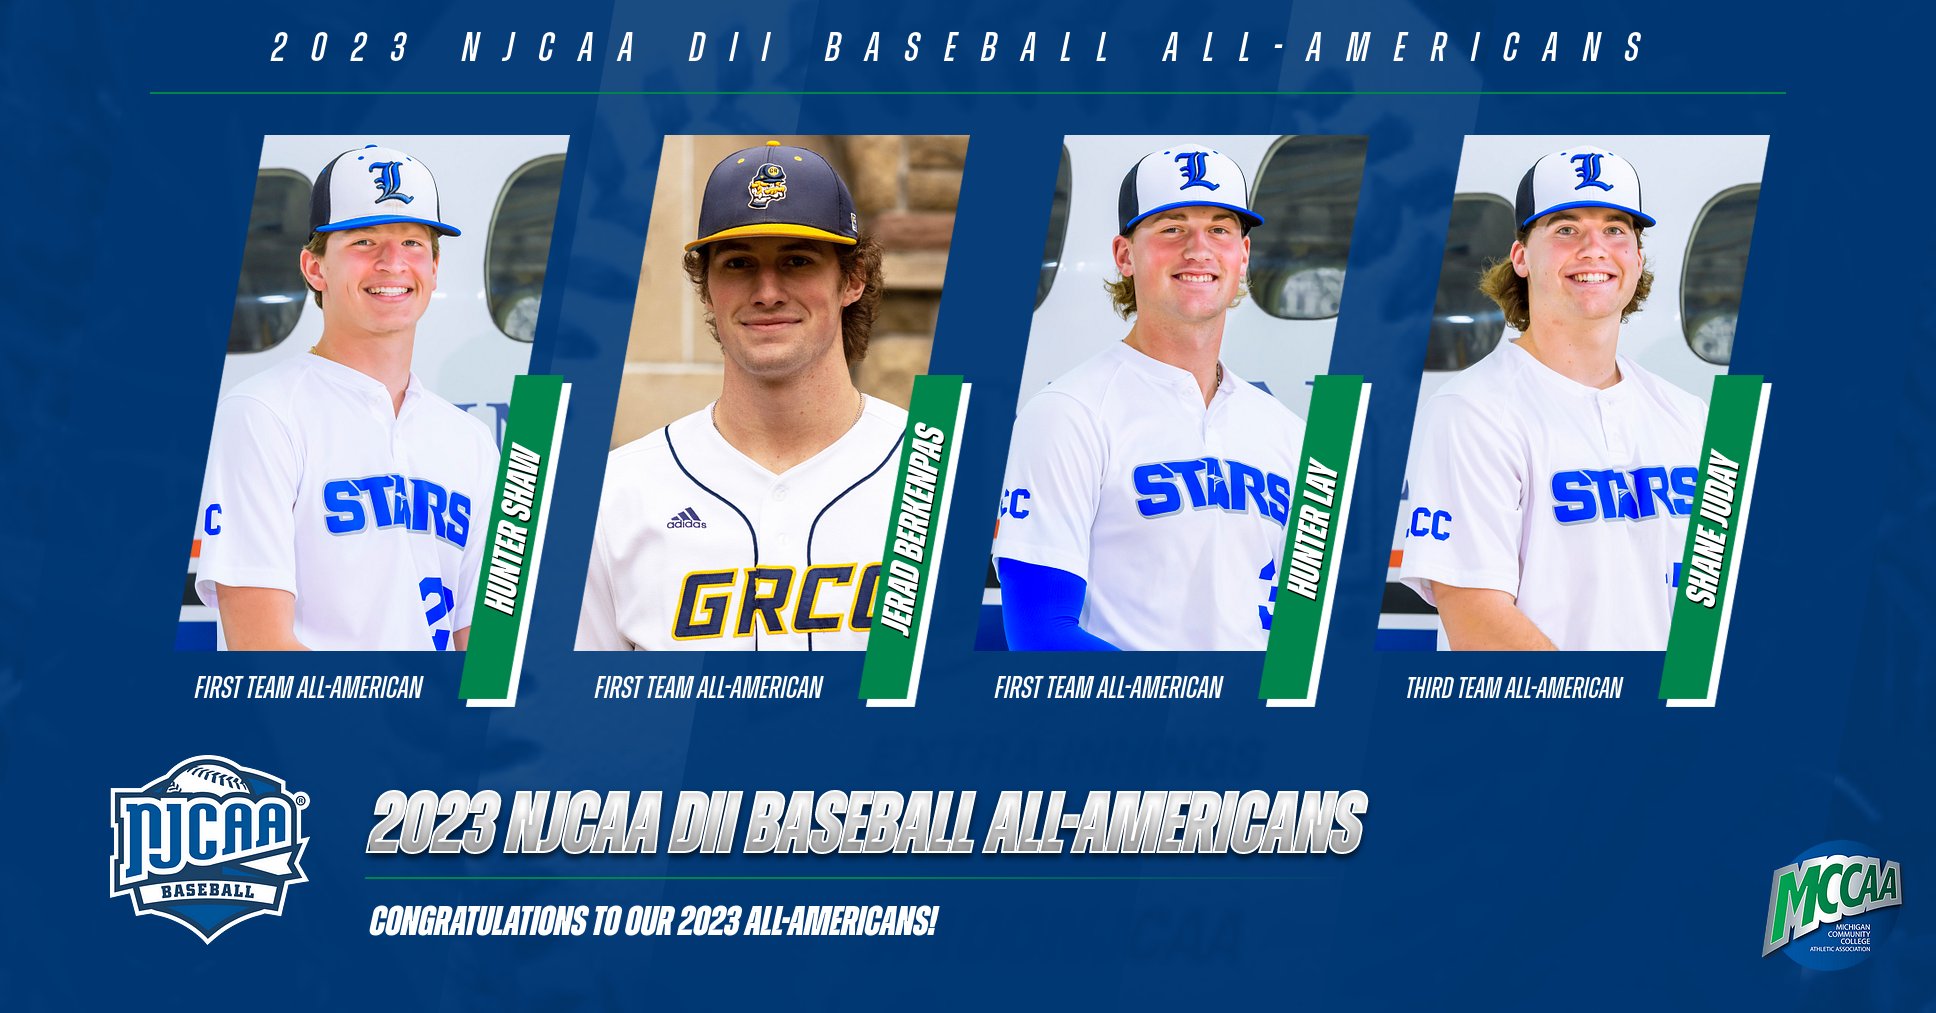 Four From MCCAA Named 2023 NJCAA Division II Baseball All-Americans